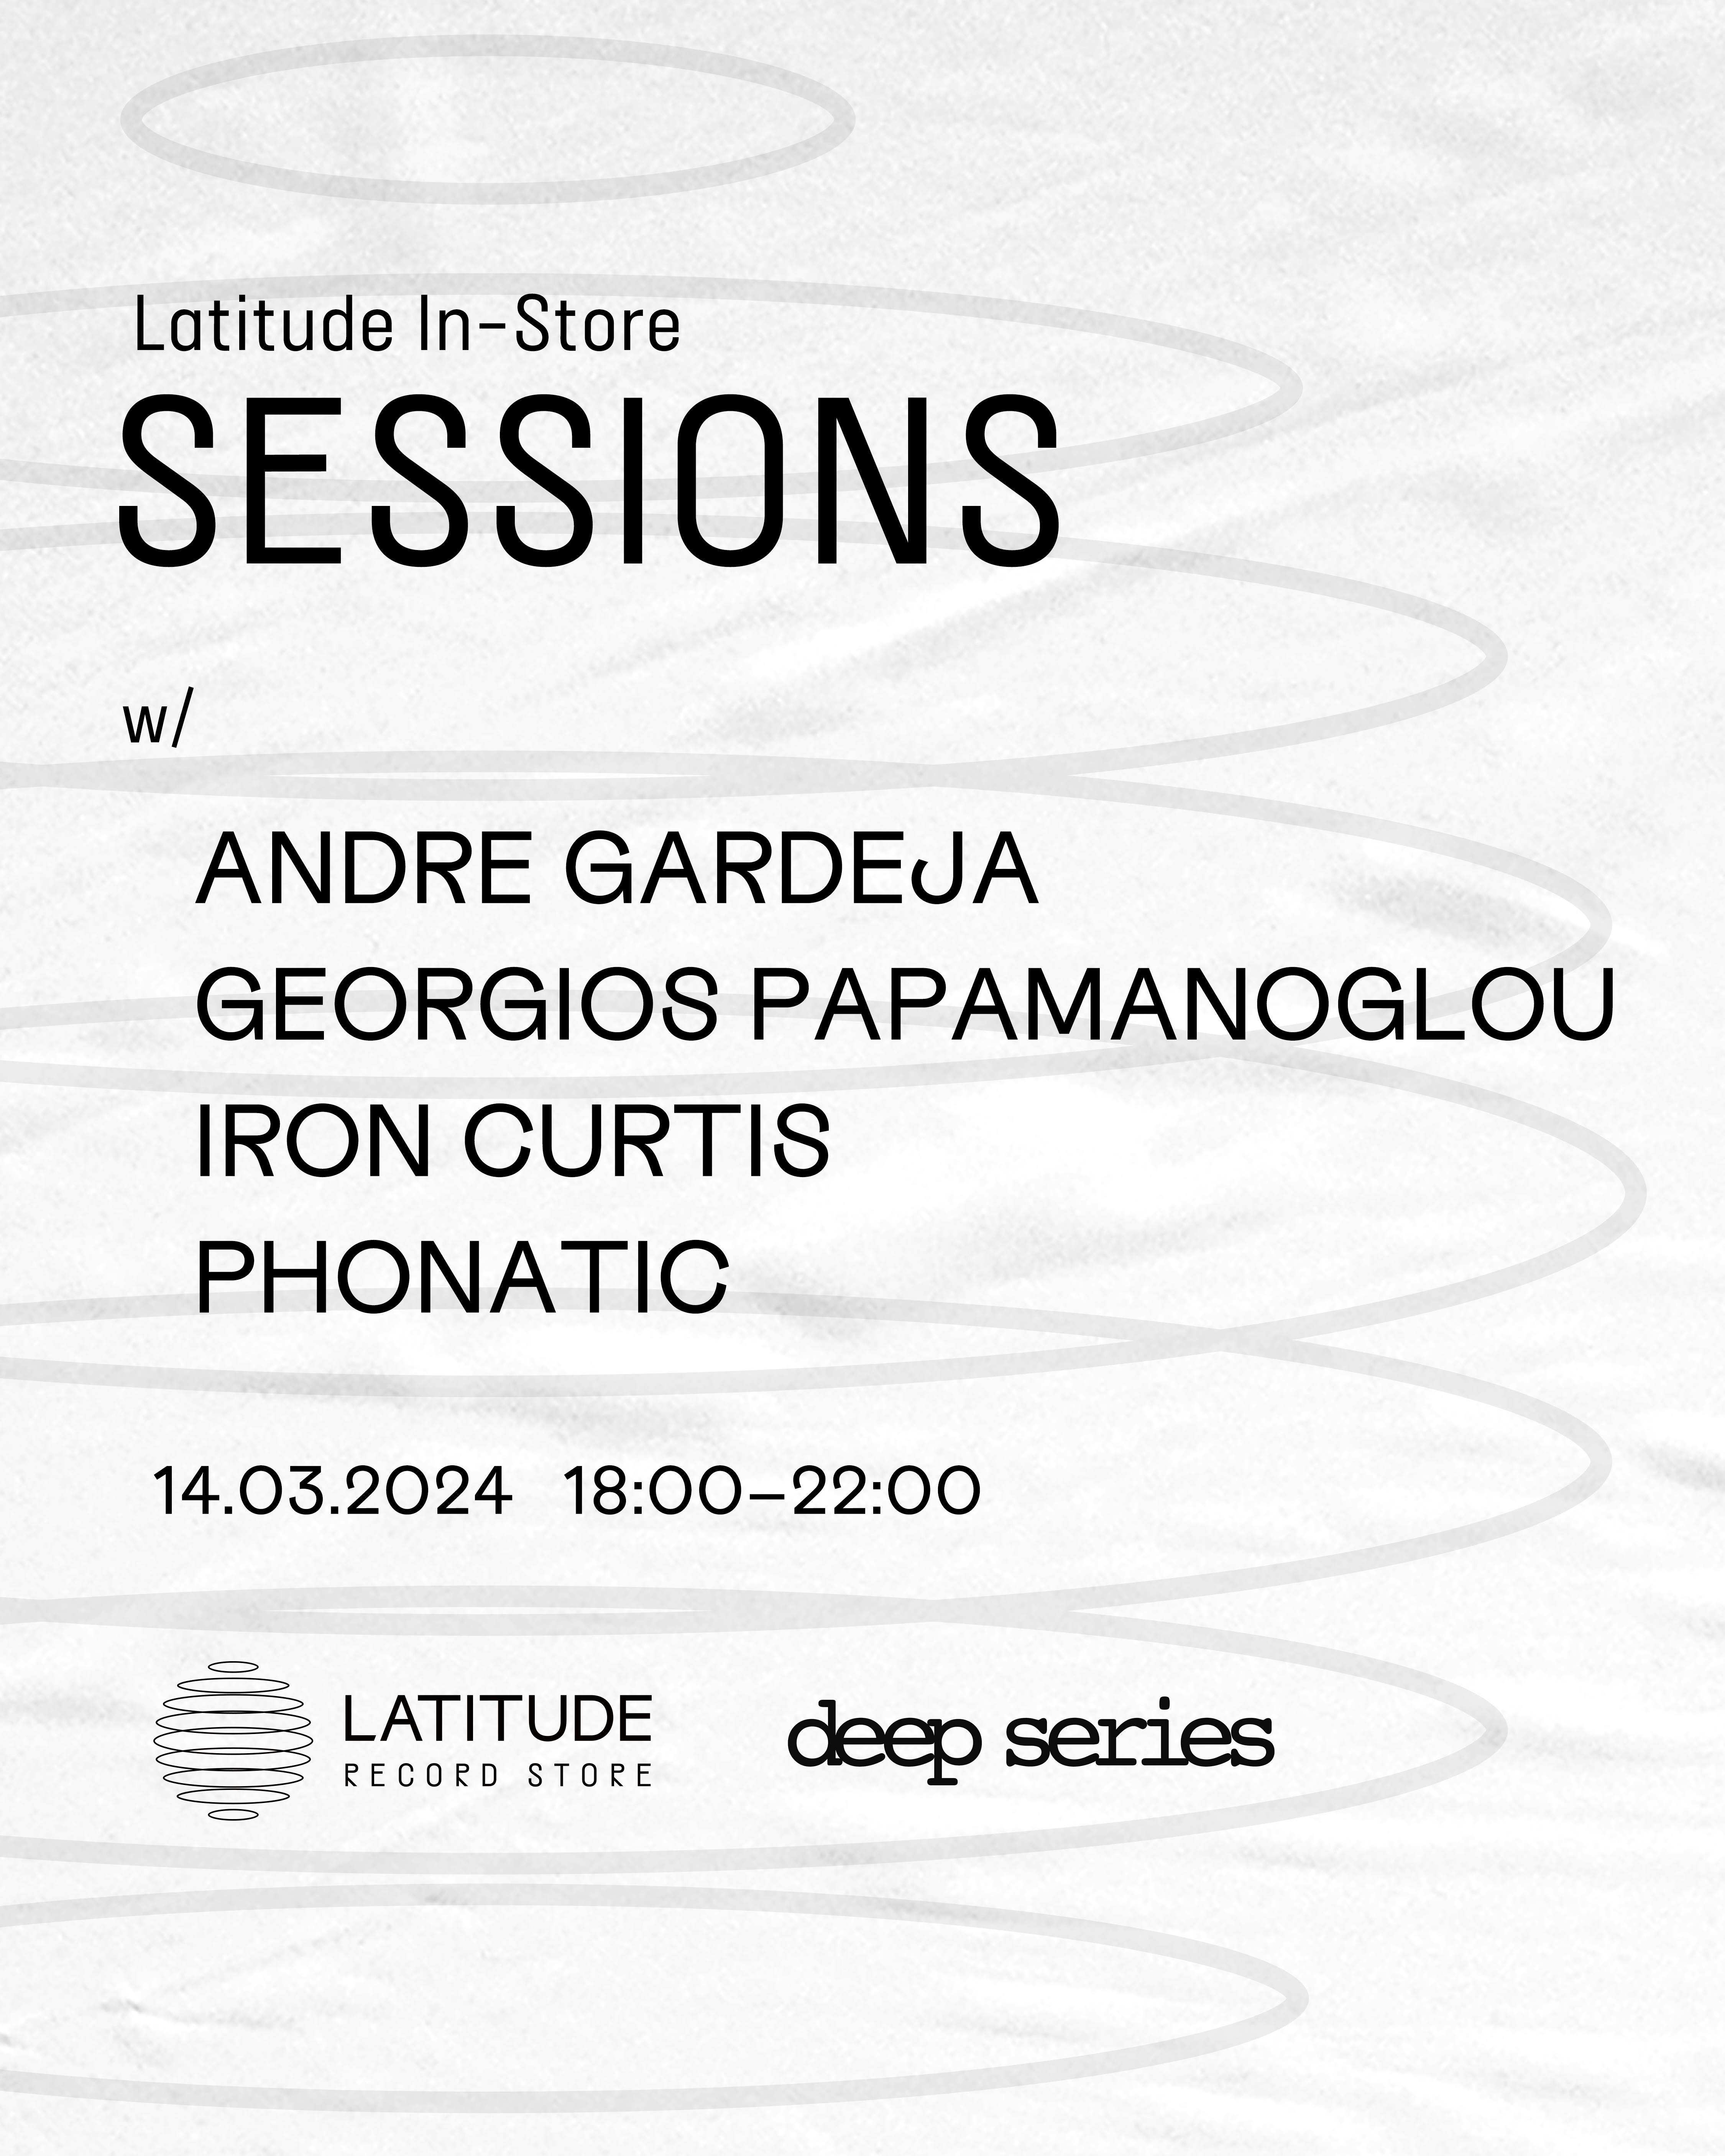 Latitude In-Store Sessions with Deep Series - フライヤー表